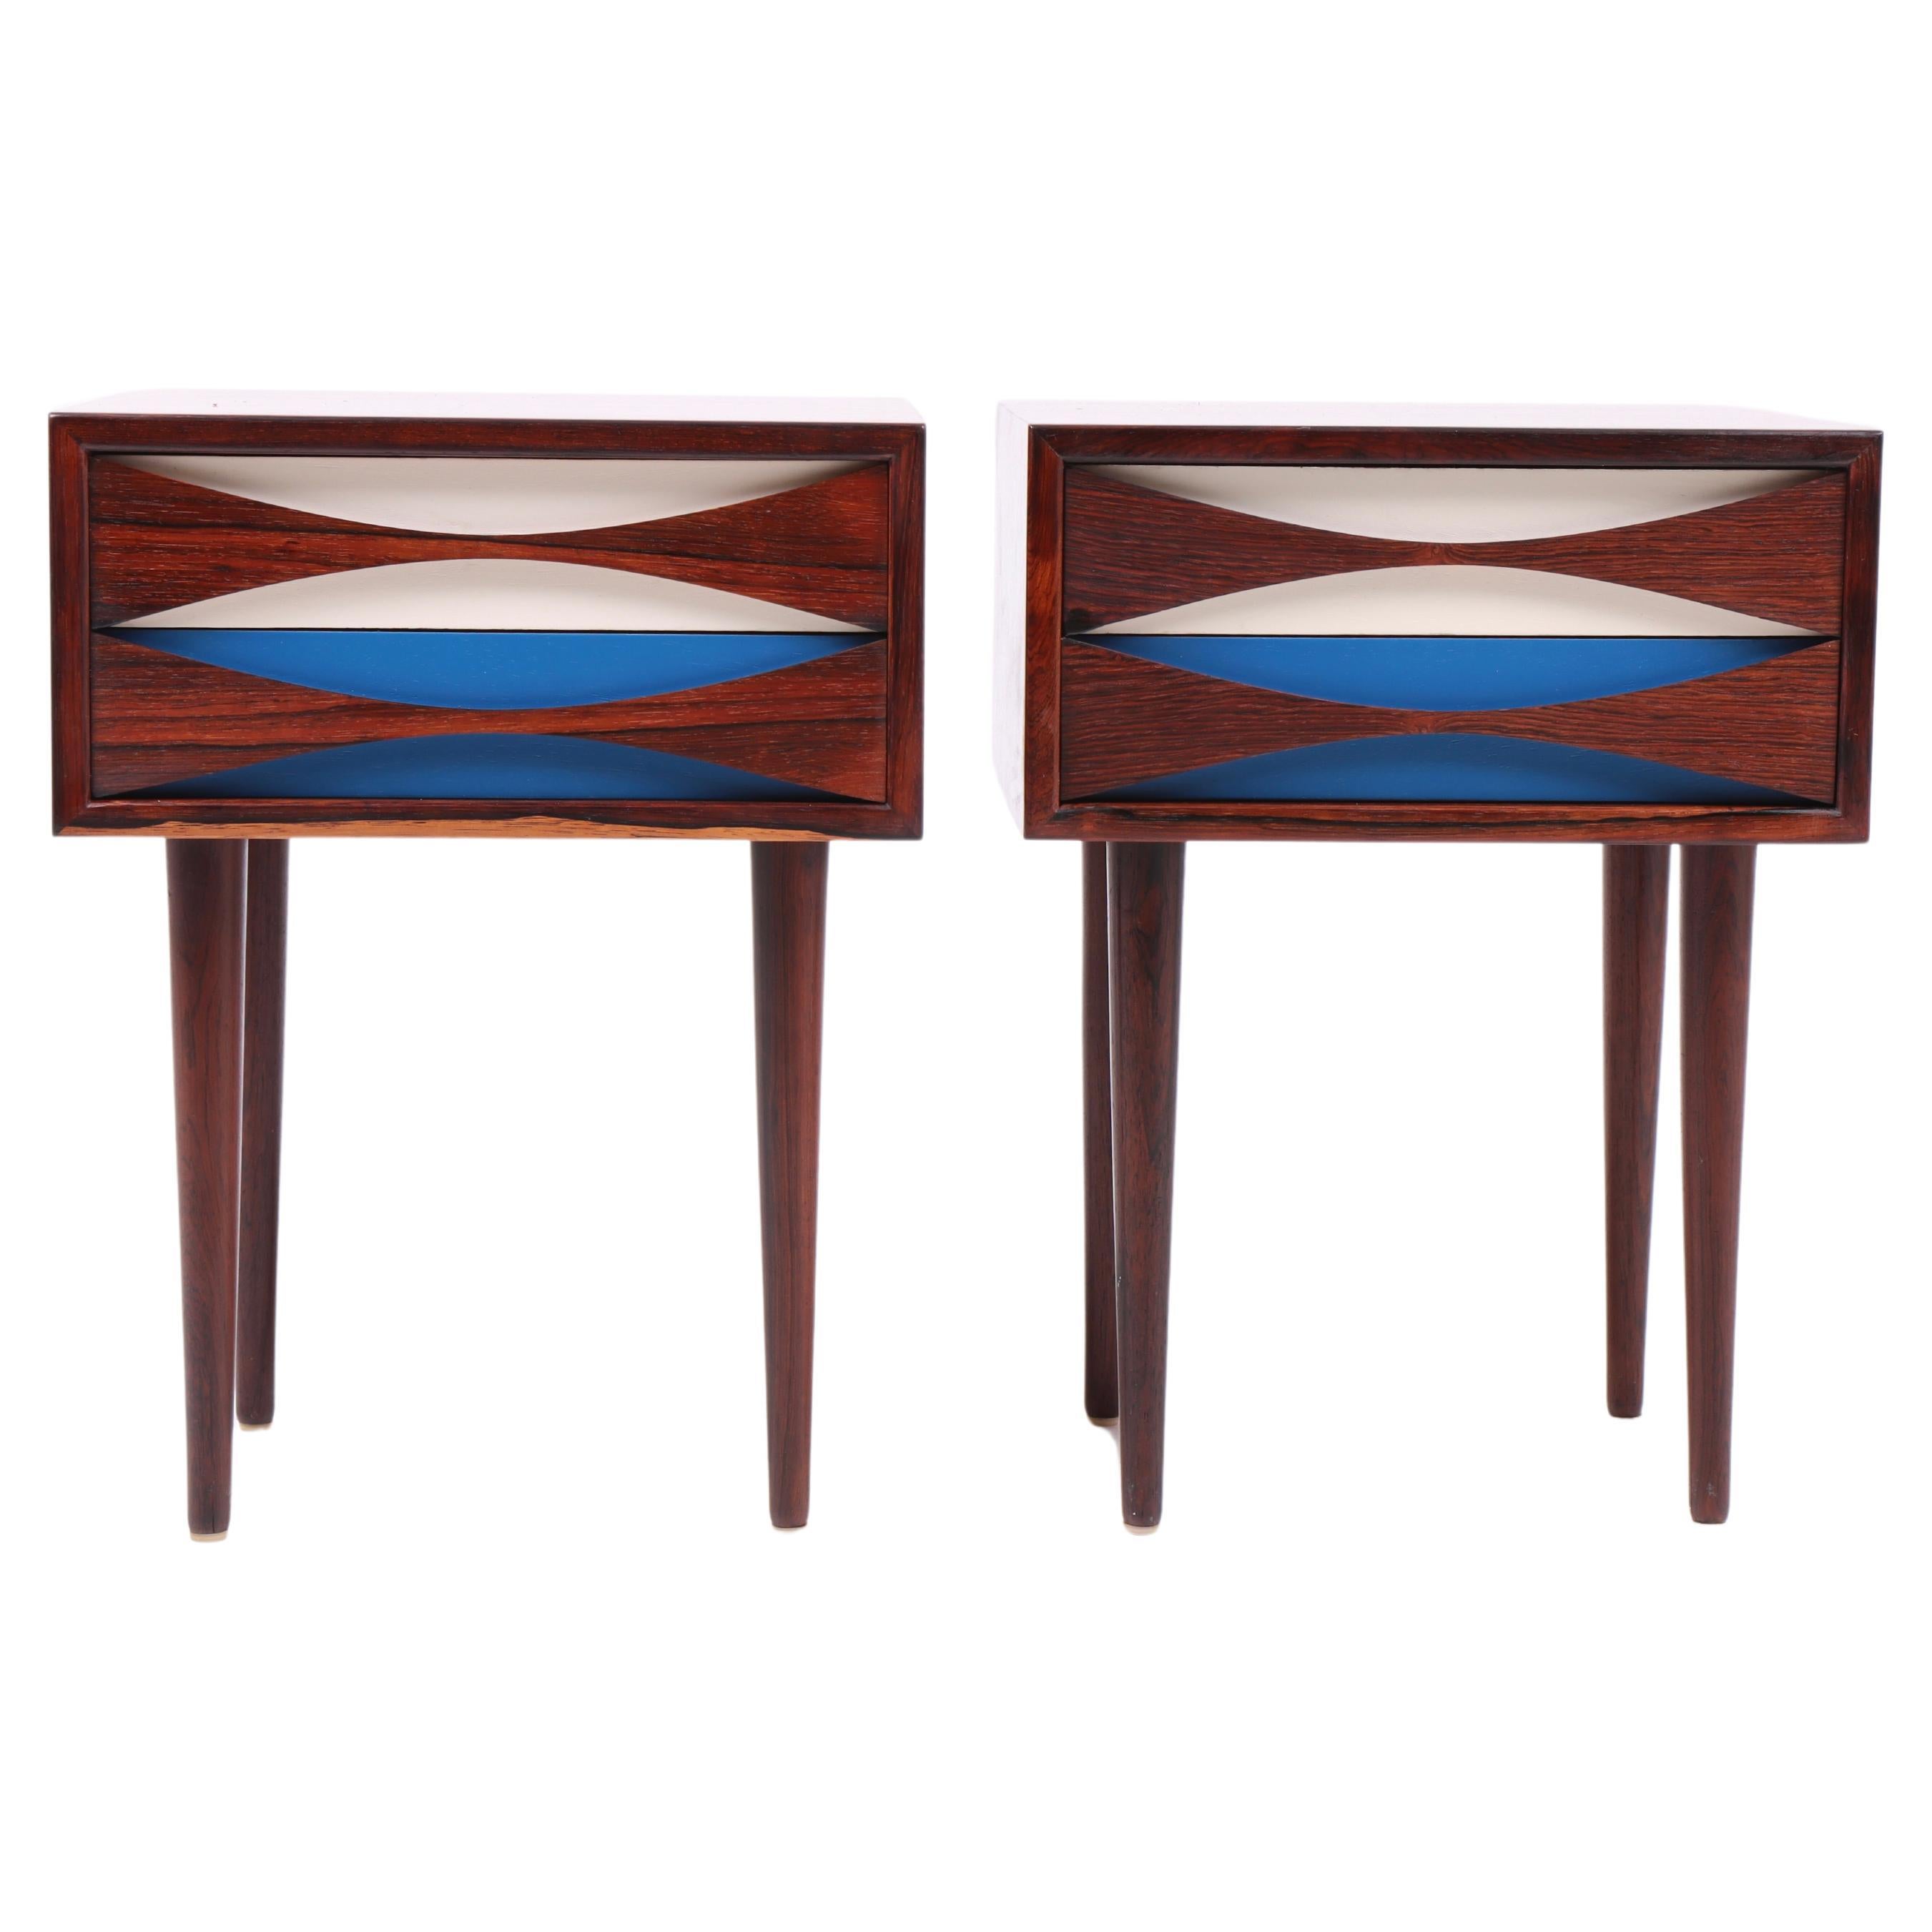 Pair of Rare Midcentury Nightstands in Rosewood by Niels Clausen, 1960s For Sale